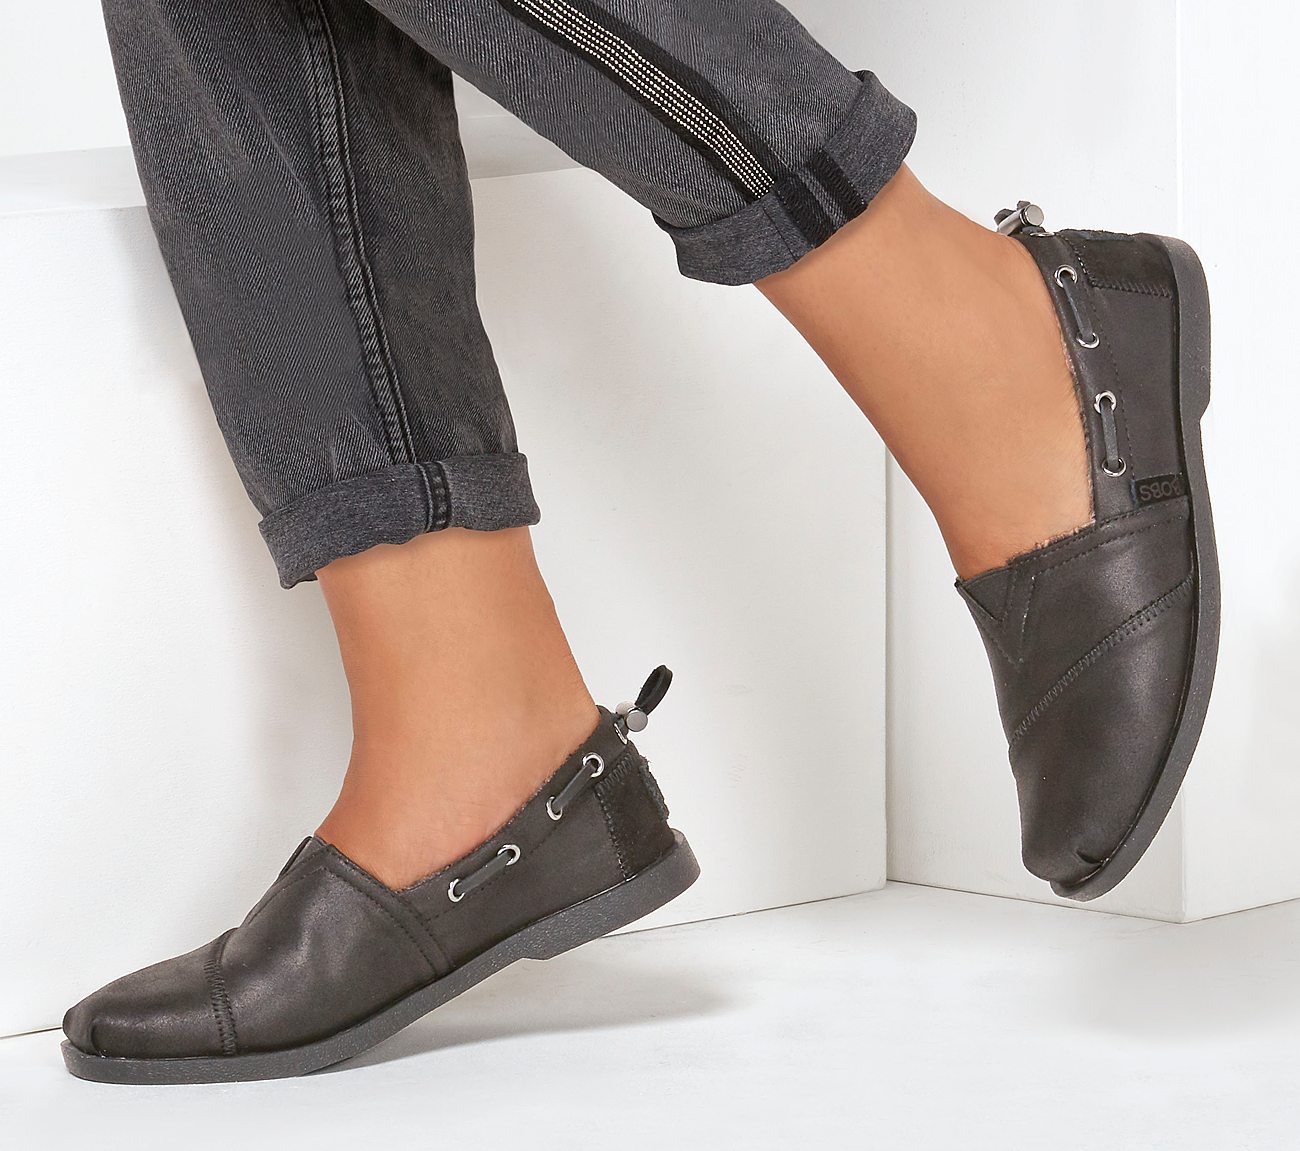 black leather bobs shoes